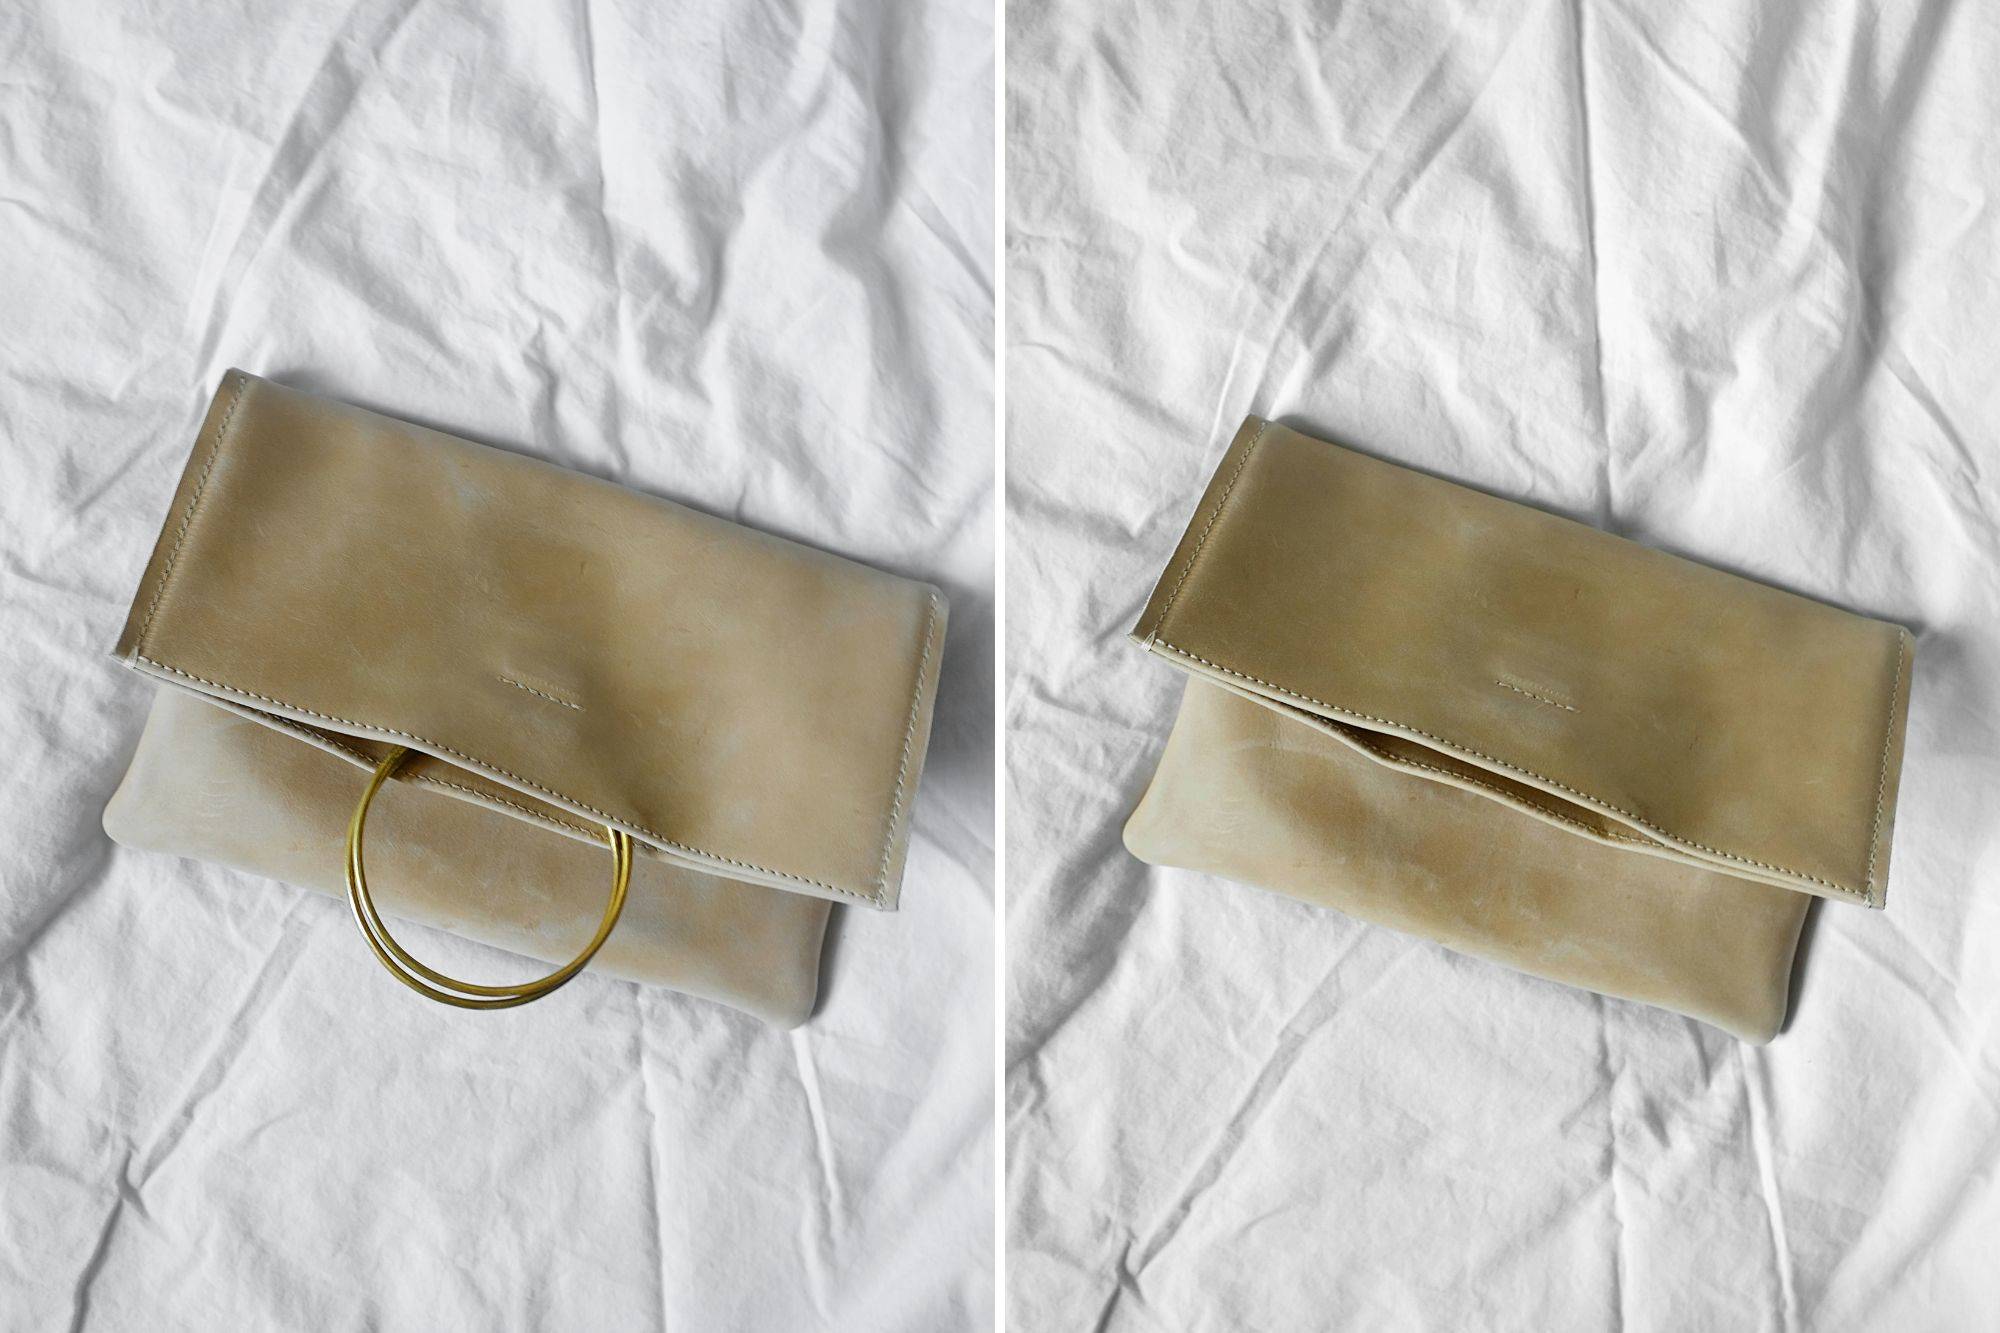 The Nyala Foldover Clutch folded over with the ring handles in and out of the bag